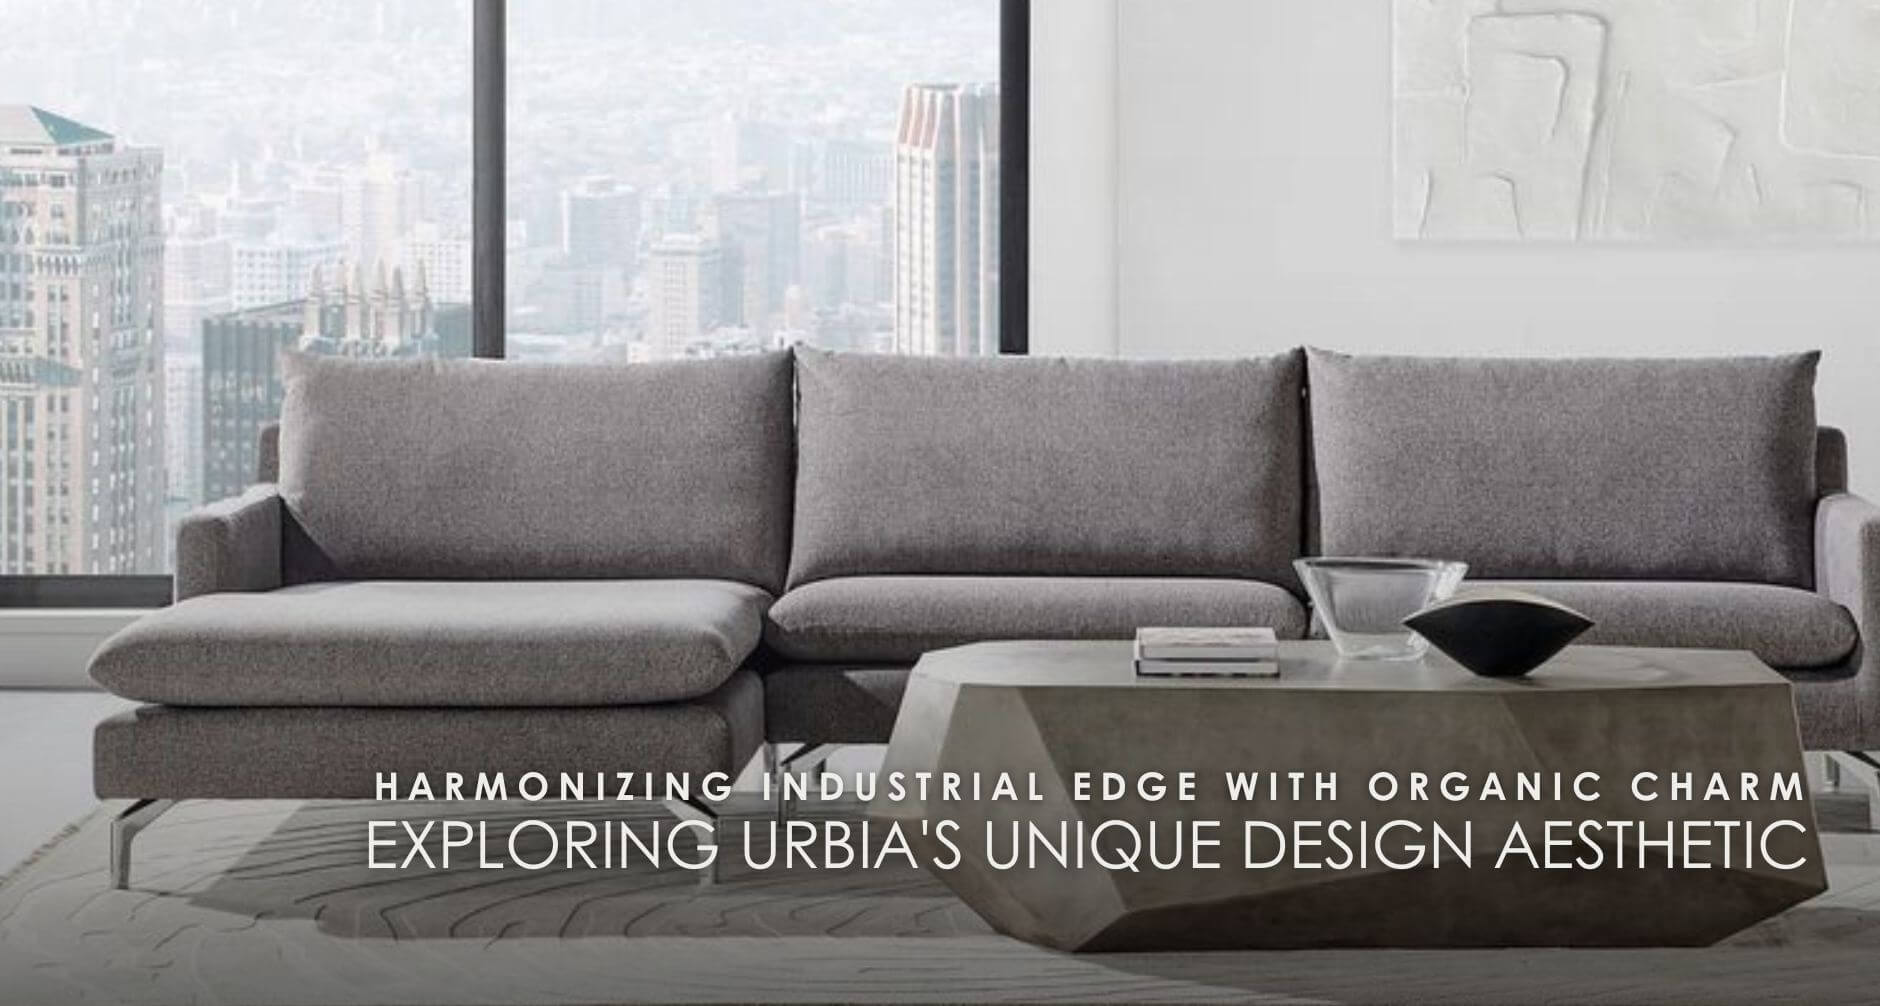 Experience the captivating fusion of industrial edge and organic charm with Urbia's unique design aesthetic. From sleek lines and exposed hardware to lush greenery and natural textures, Urbia effortlessly blends rugged elements with soothing warmth.